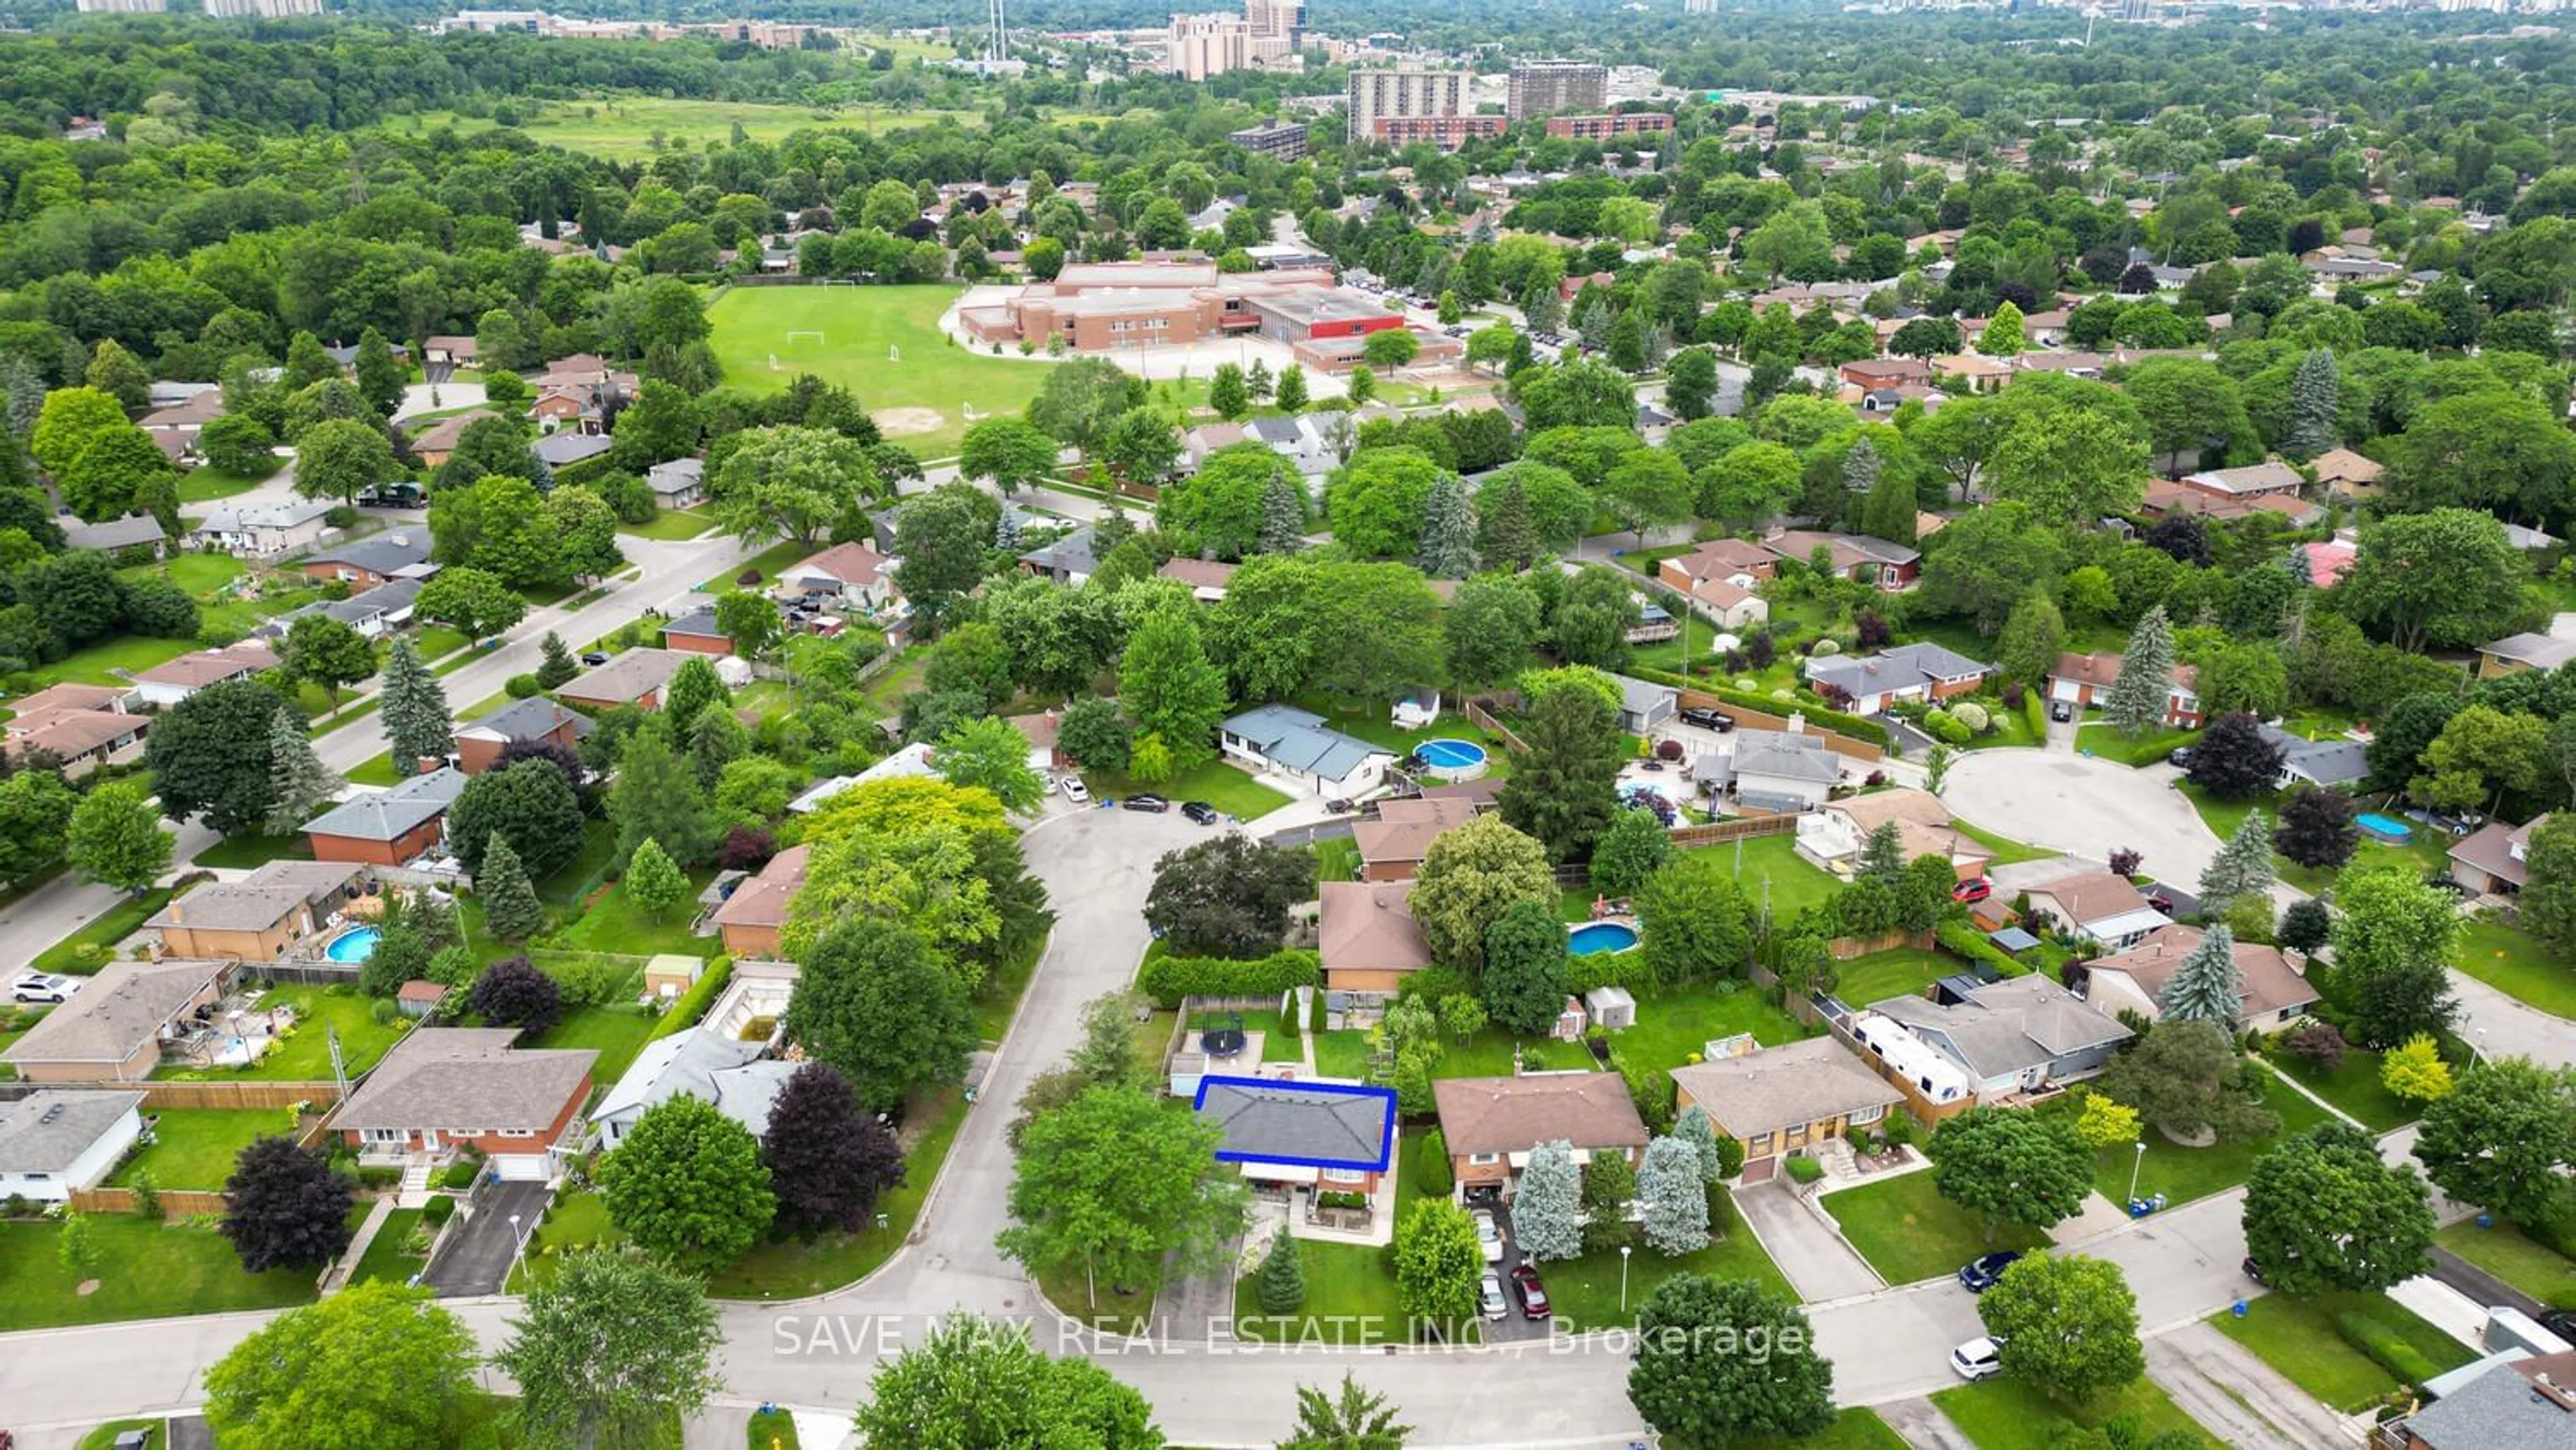 Lakeview for 51 ALMOND Rd, London Ontario N5Z 4C6